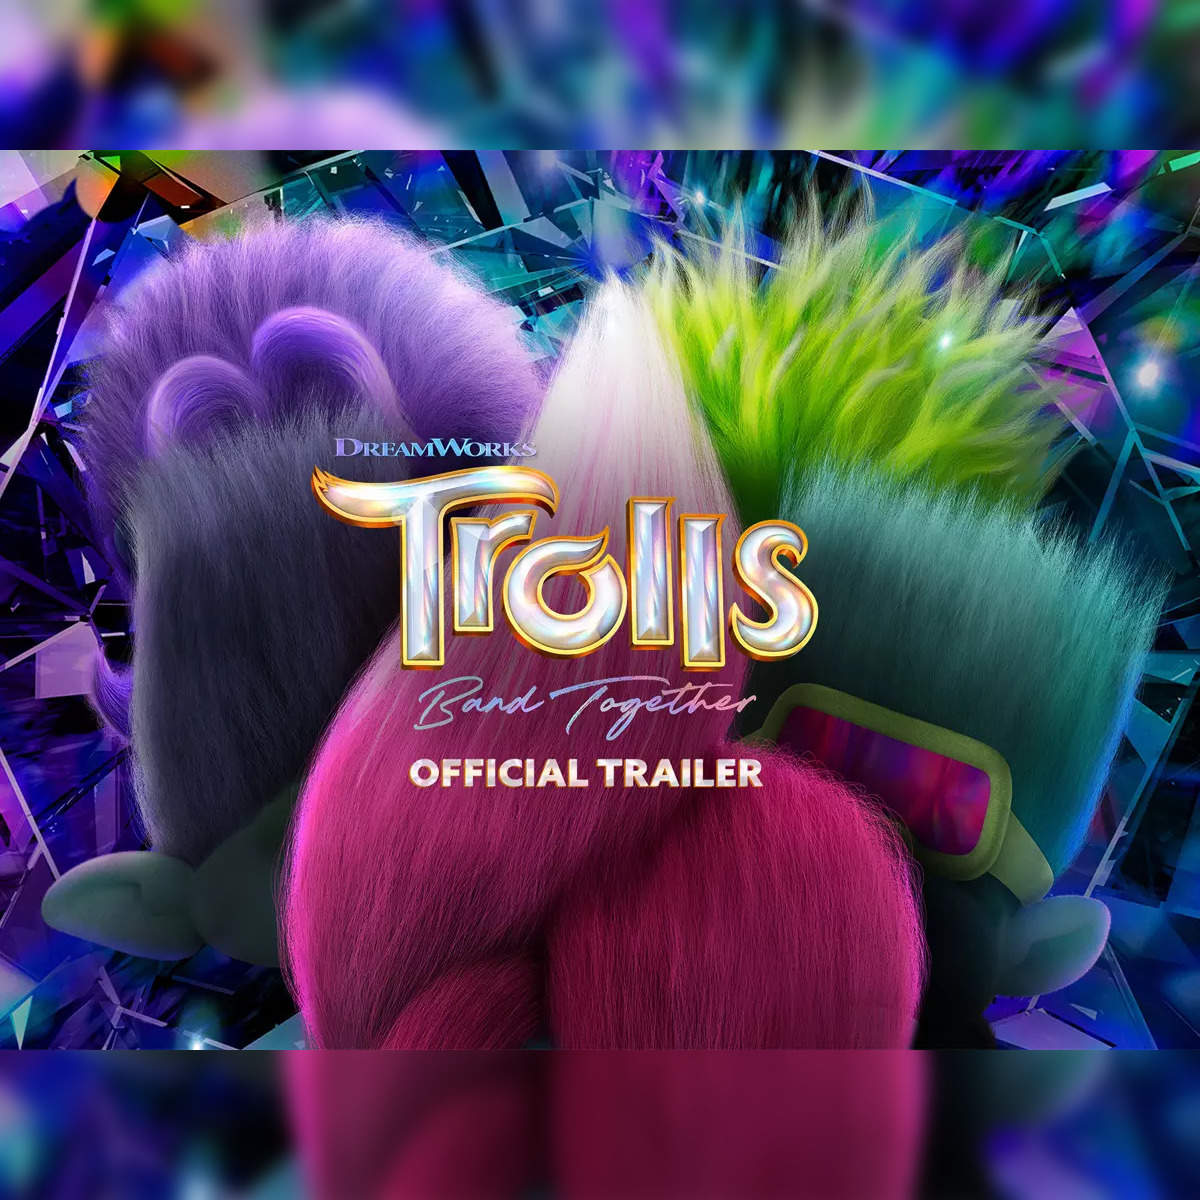 Trolls Band Together Cast: Everything to Know